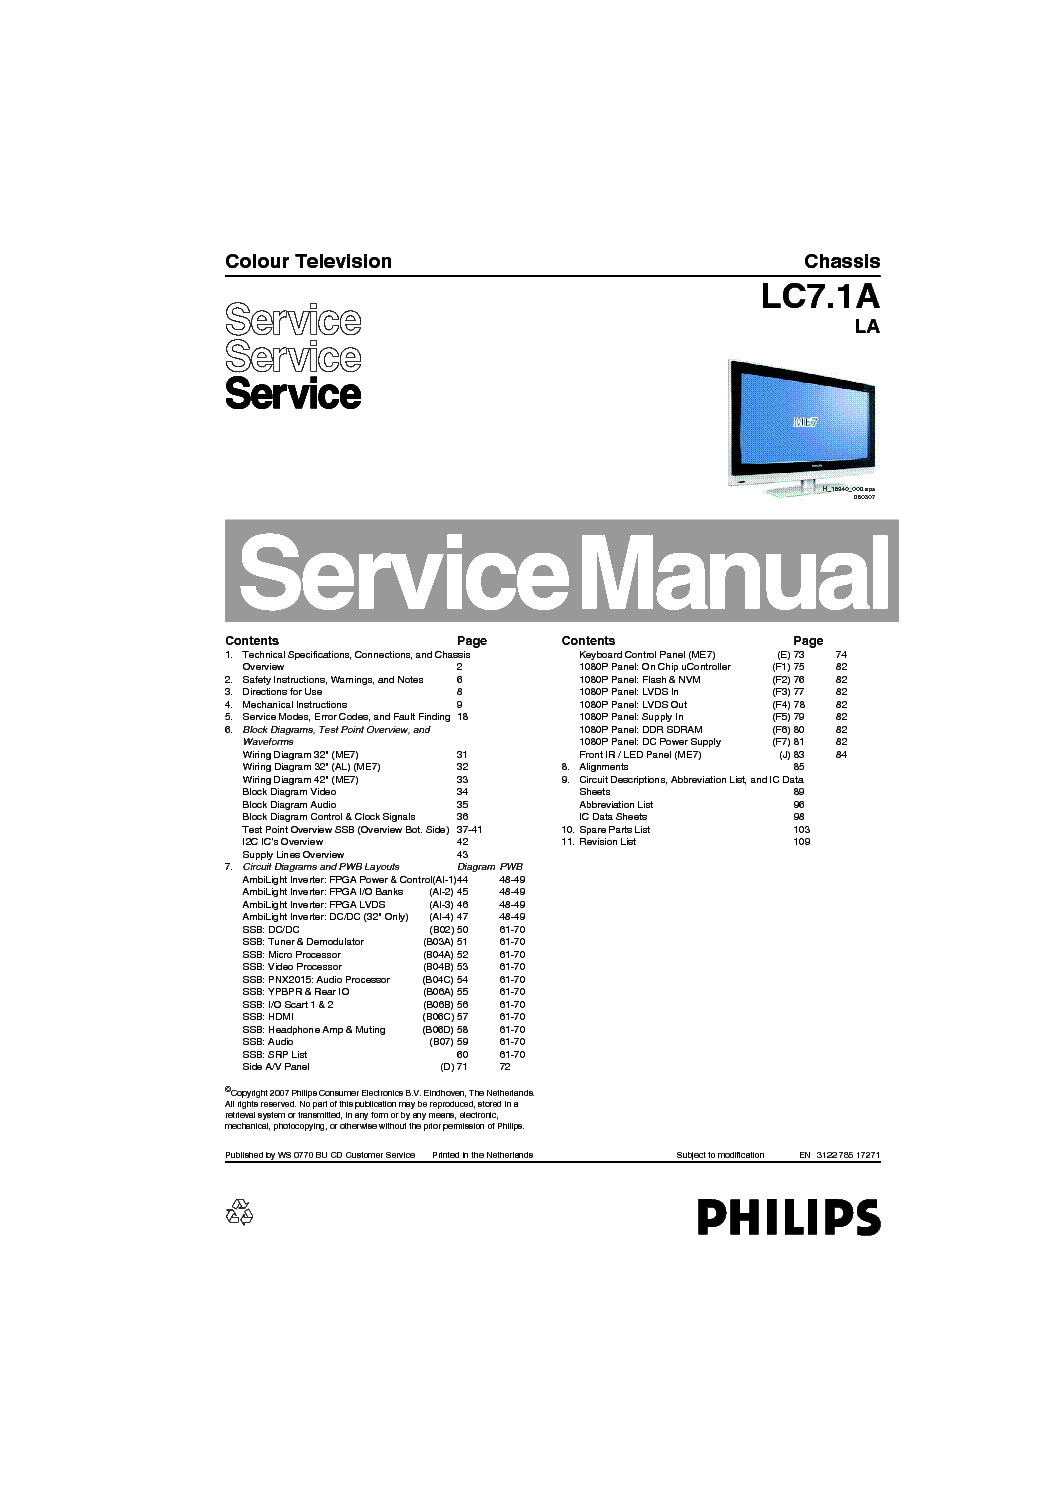 PHILIPS LC7.1ALA 312278517271 service manual (1st page)